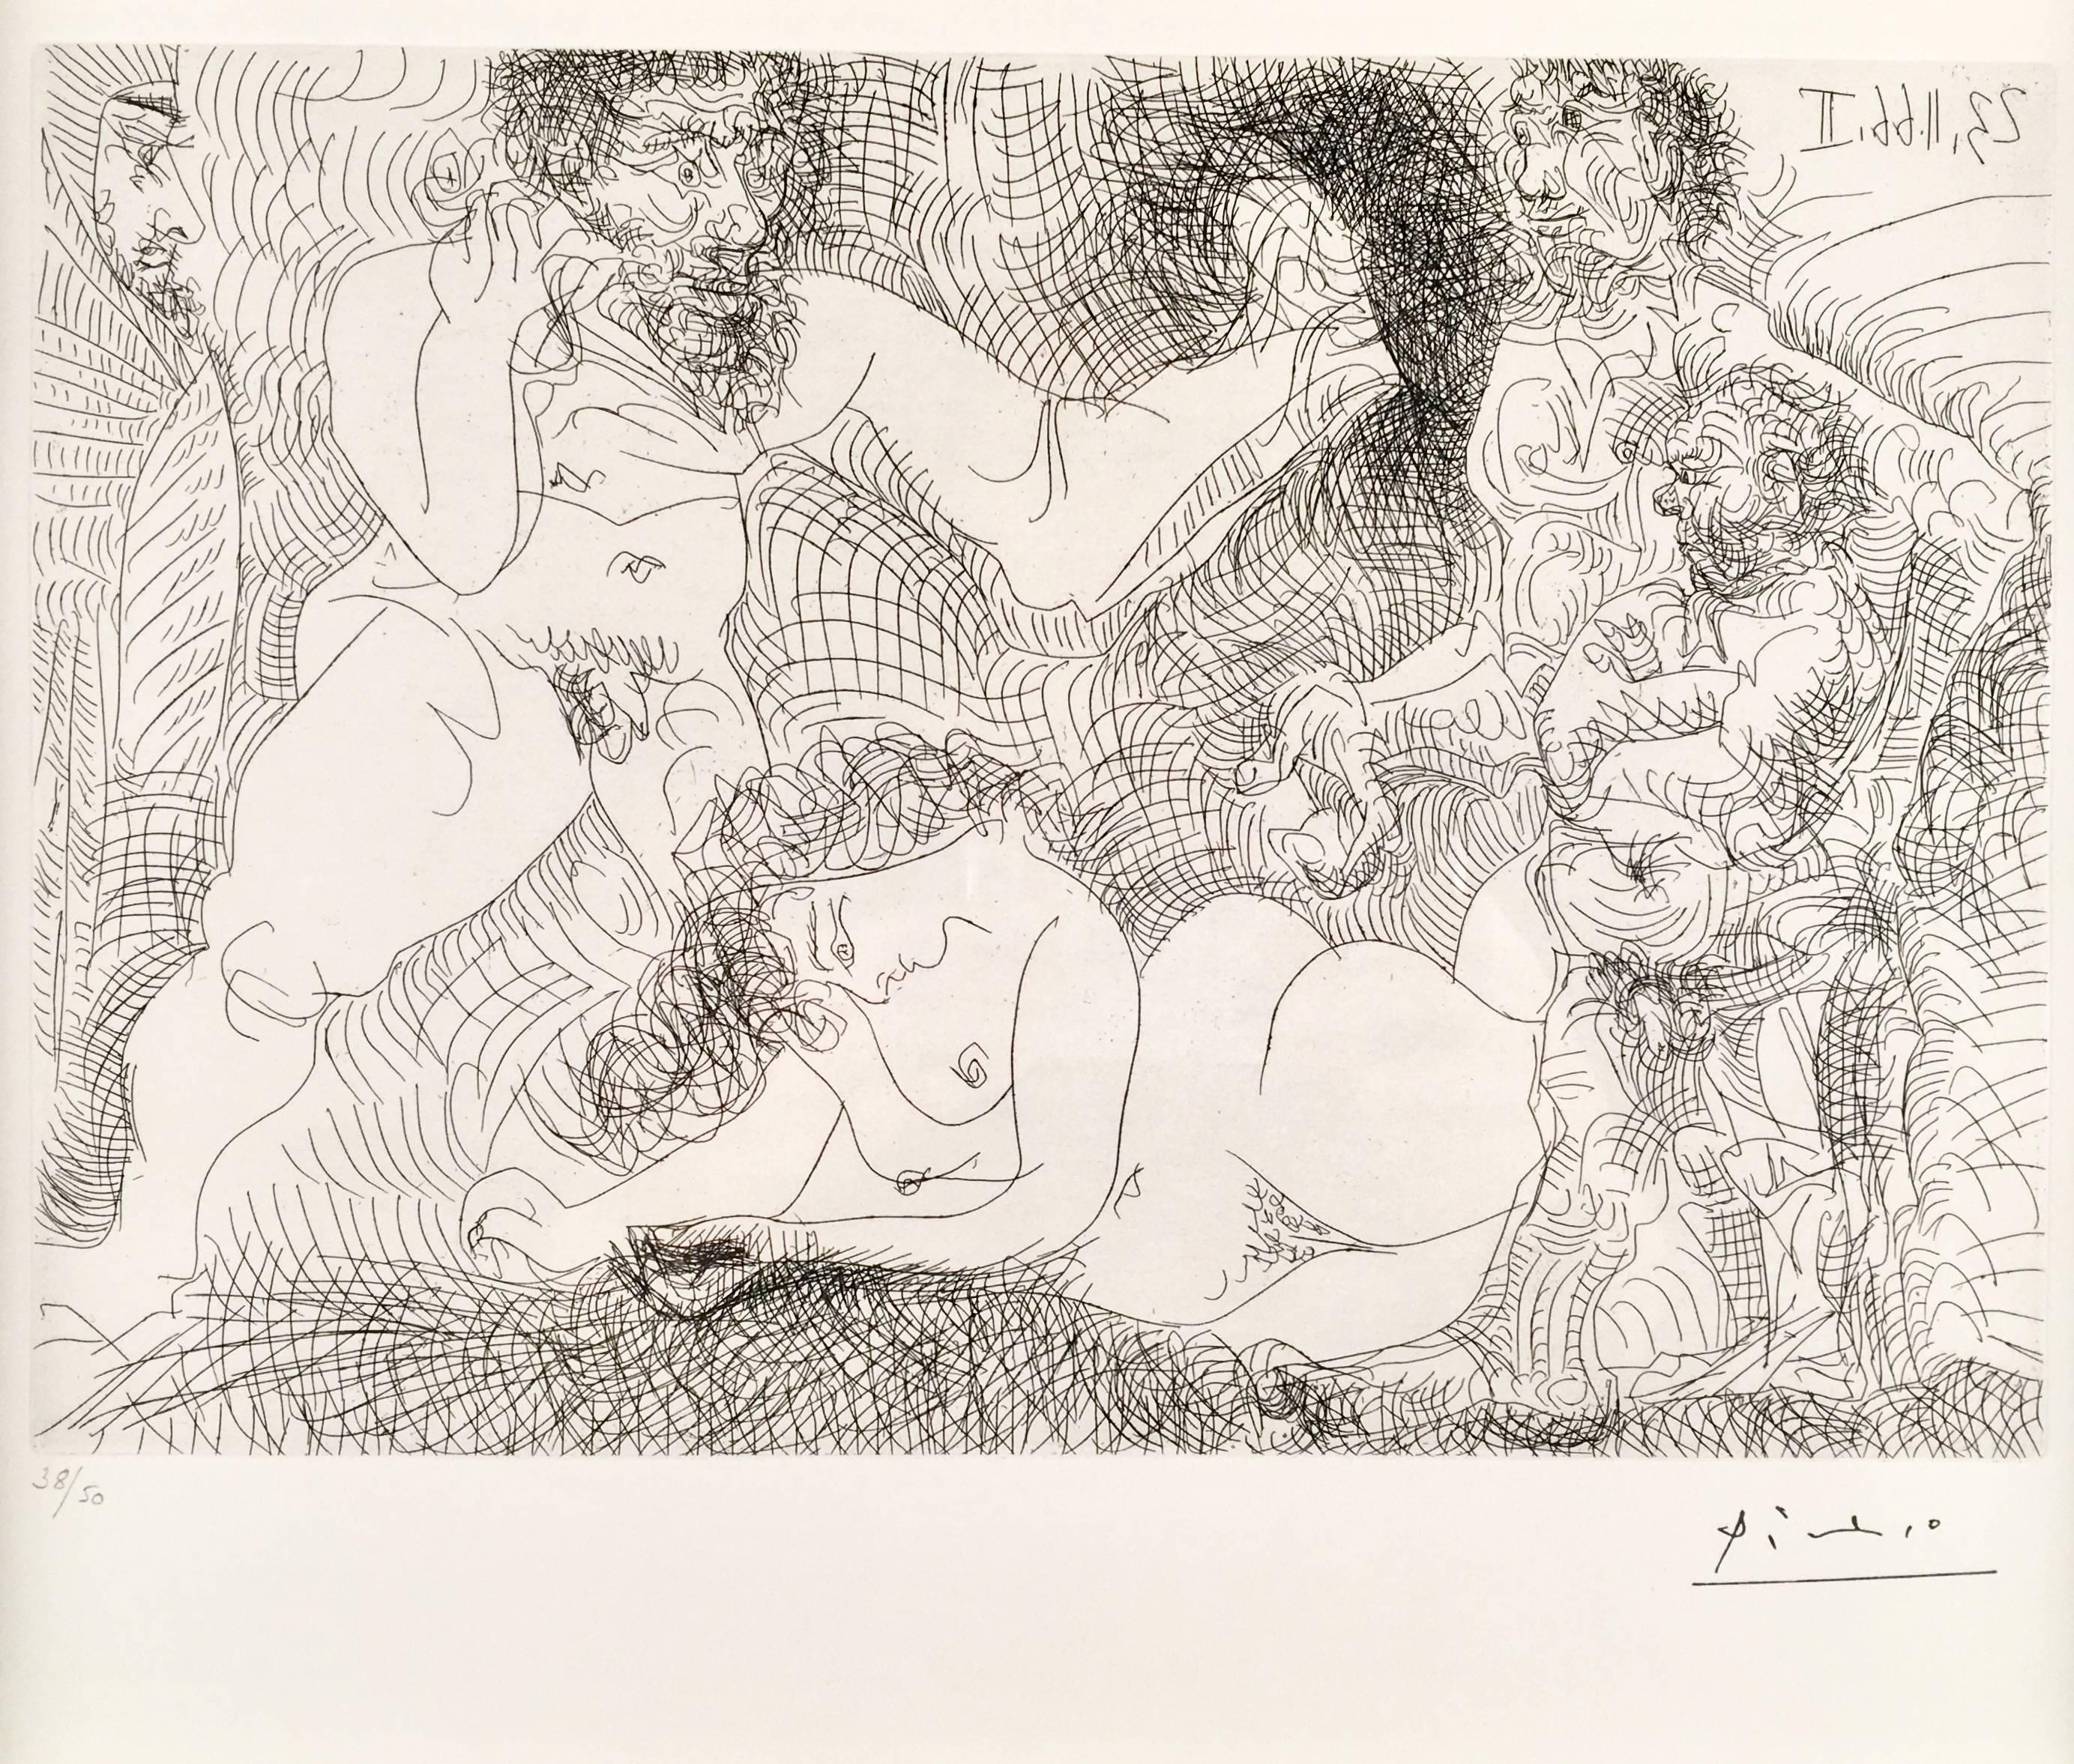 Pablo Picasso, Untitled from 23 novembre 1966 II, etching